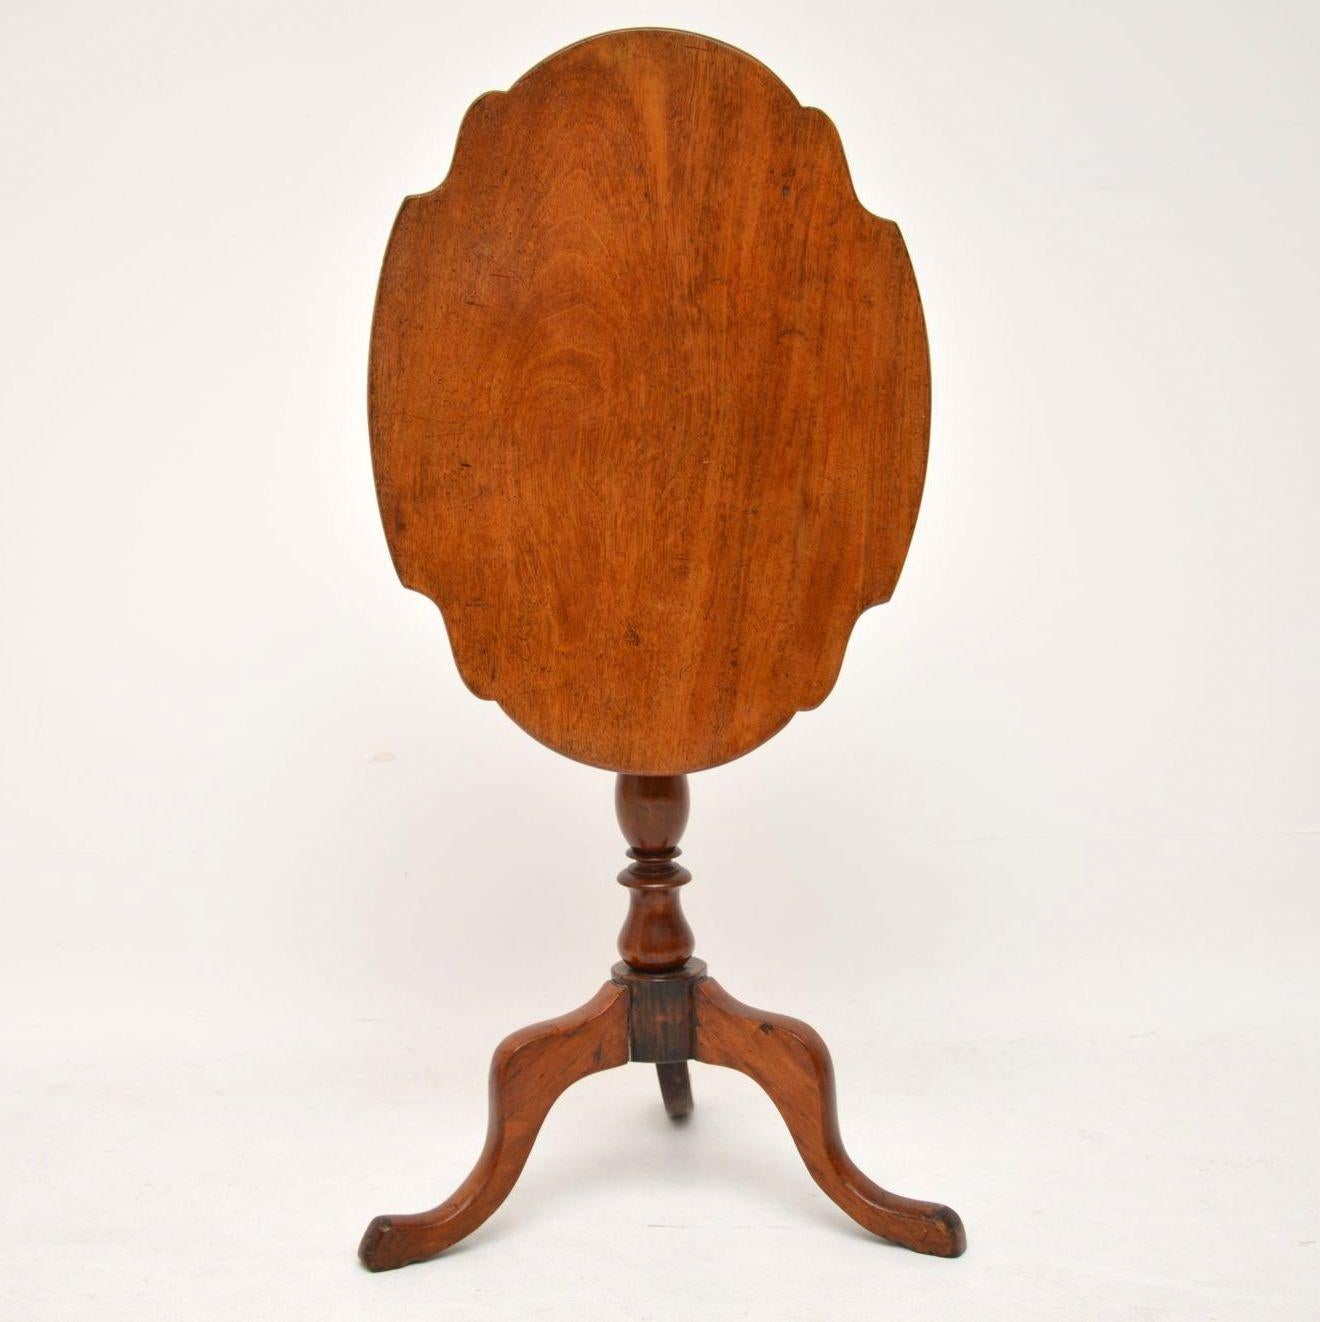 This antique solid mahogany tilt-top table has a lovely color and is full of character. It has a shaped top which can be tilted up and sits on a turned column with tripod legs. I can’t work out if it’s Georgian or Victorian, so let’s say it’s from